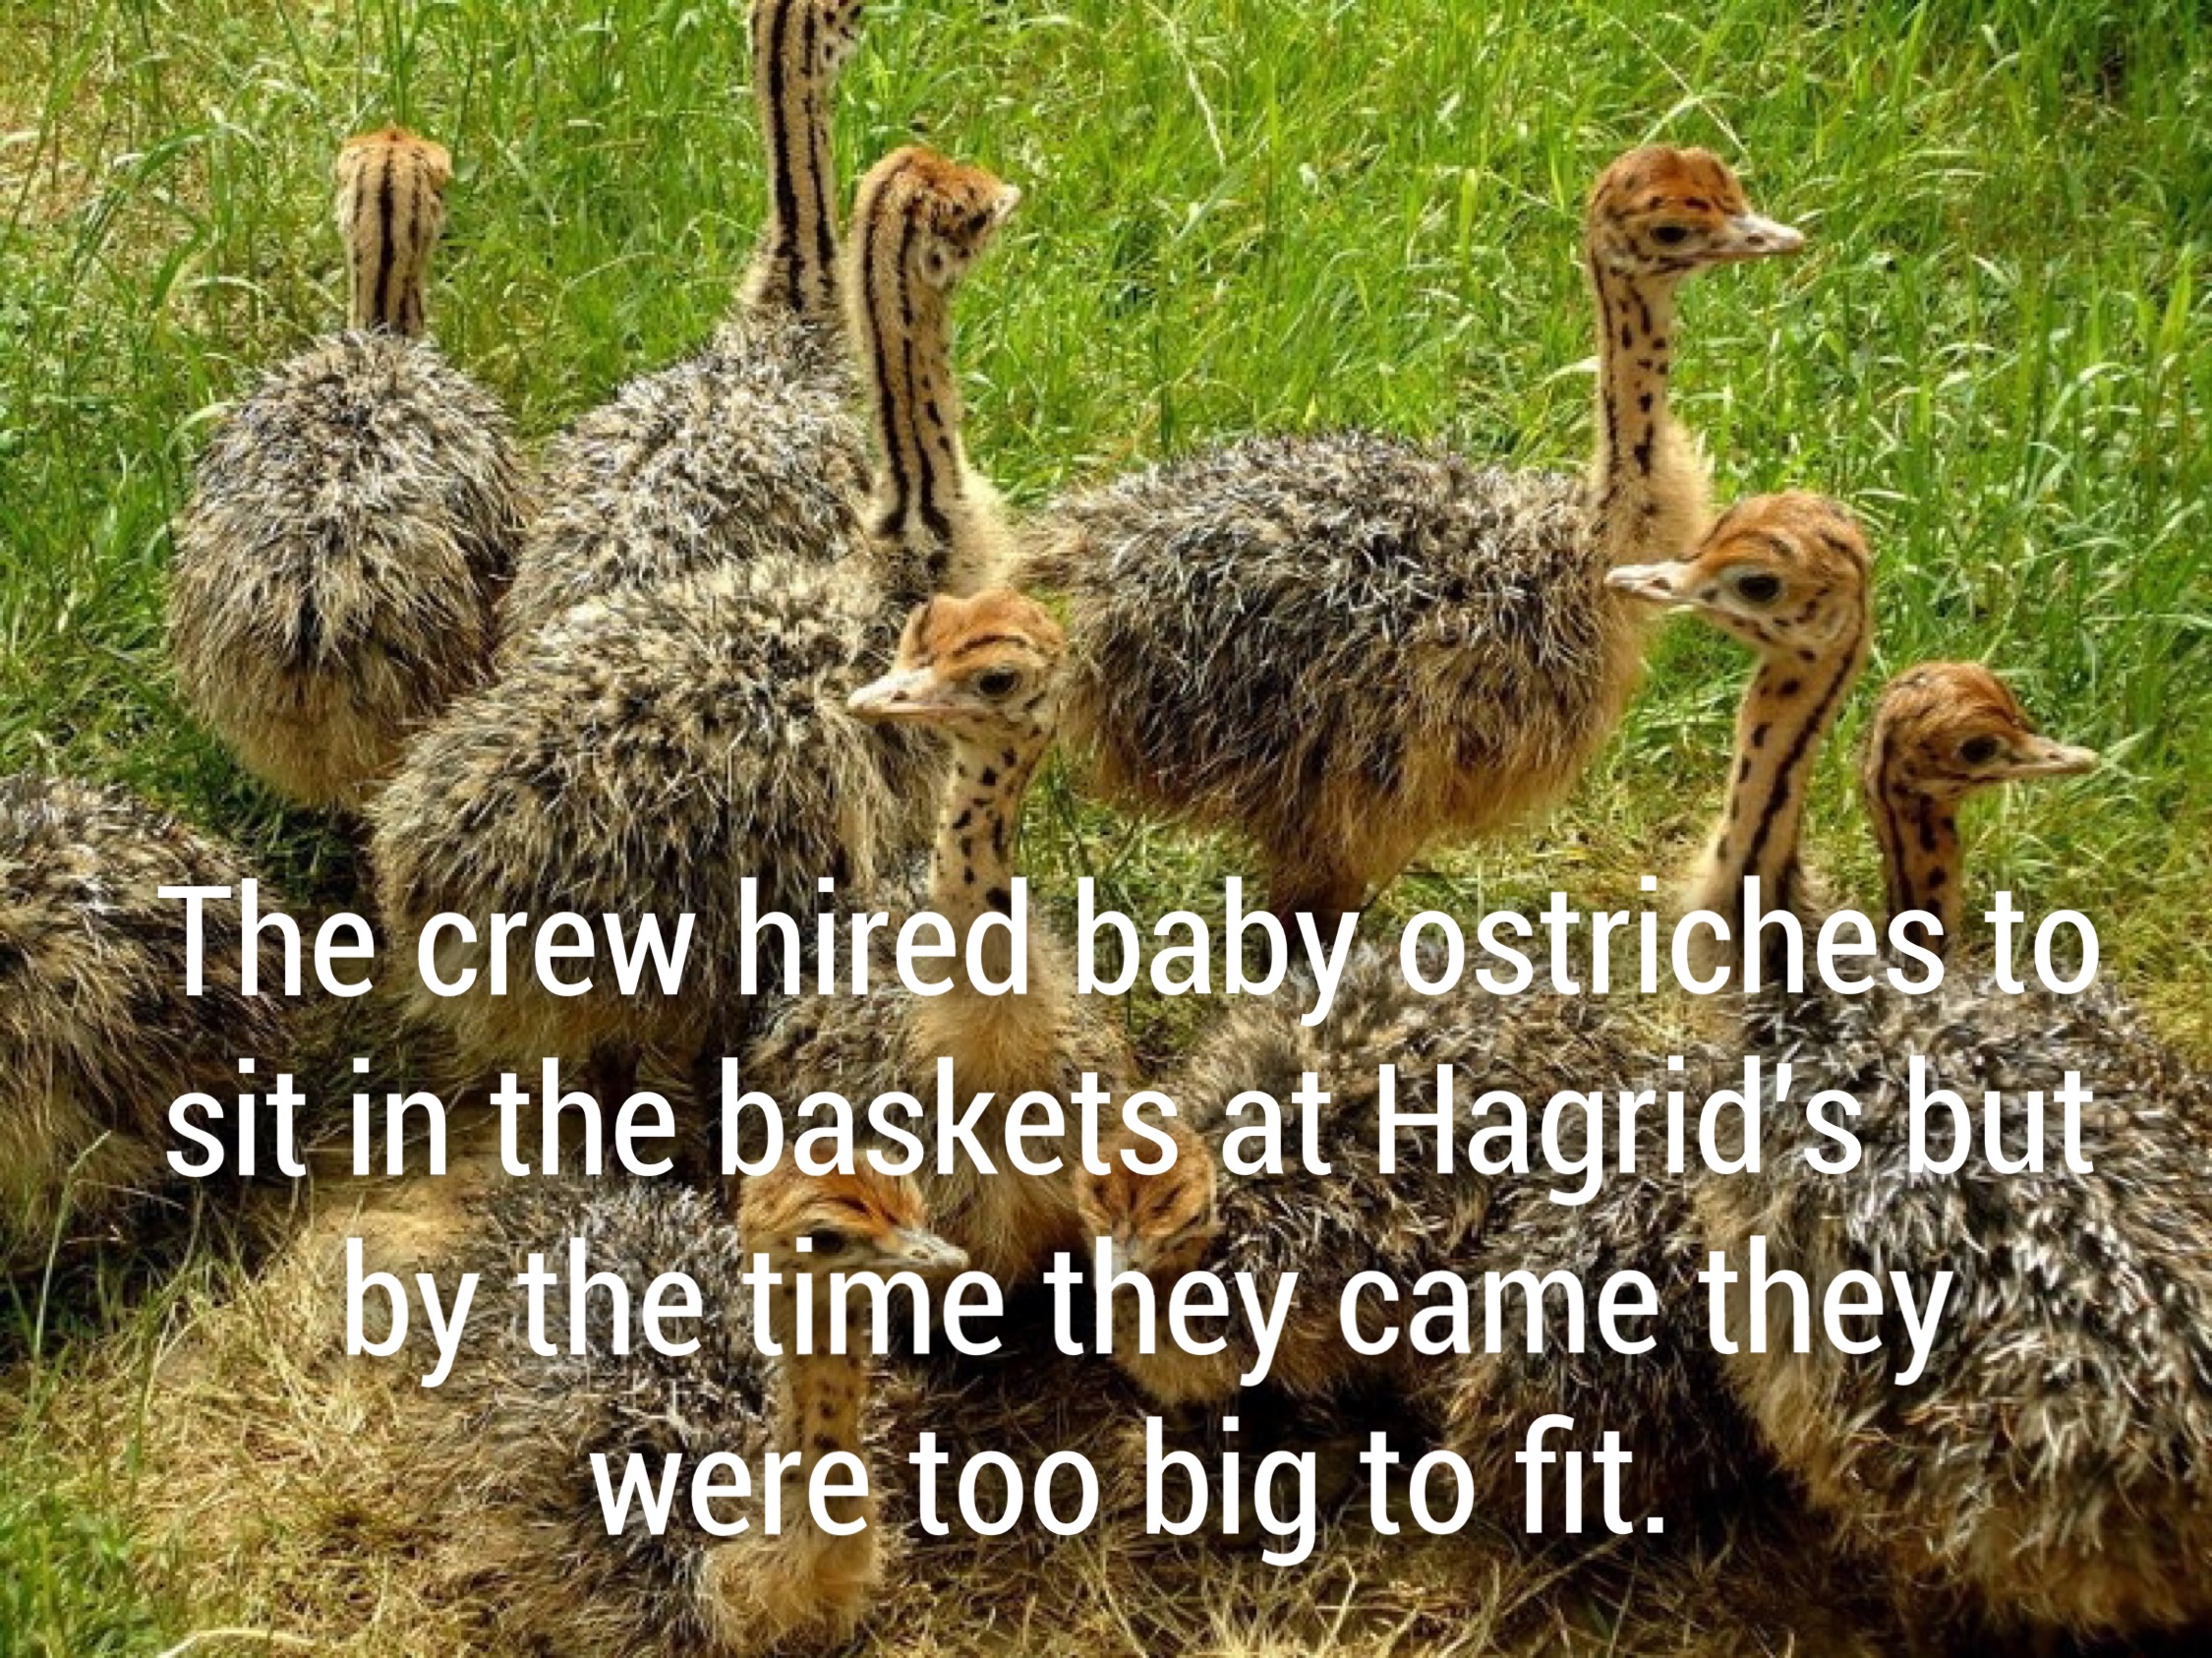 Common ostrich - The crew hired baby ostriches to sit in the baskets at Hagrid's but by the time they came they were too big to fit.